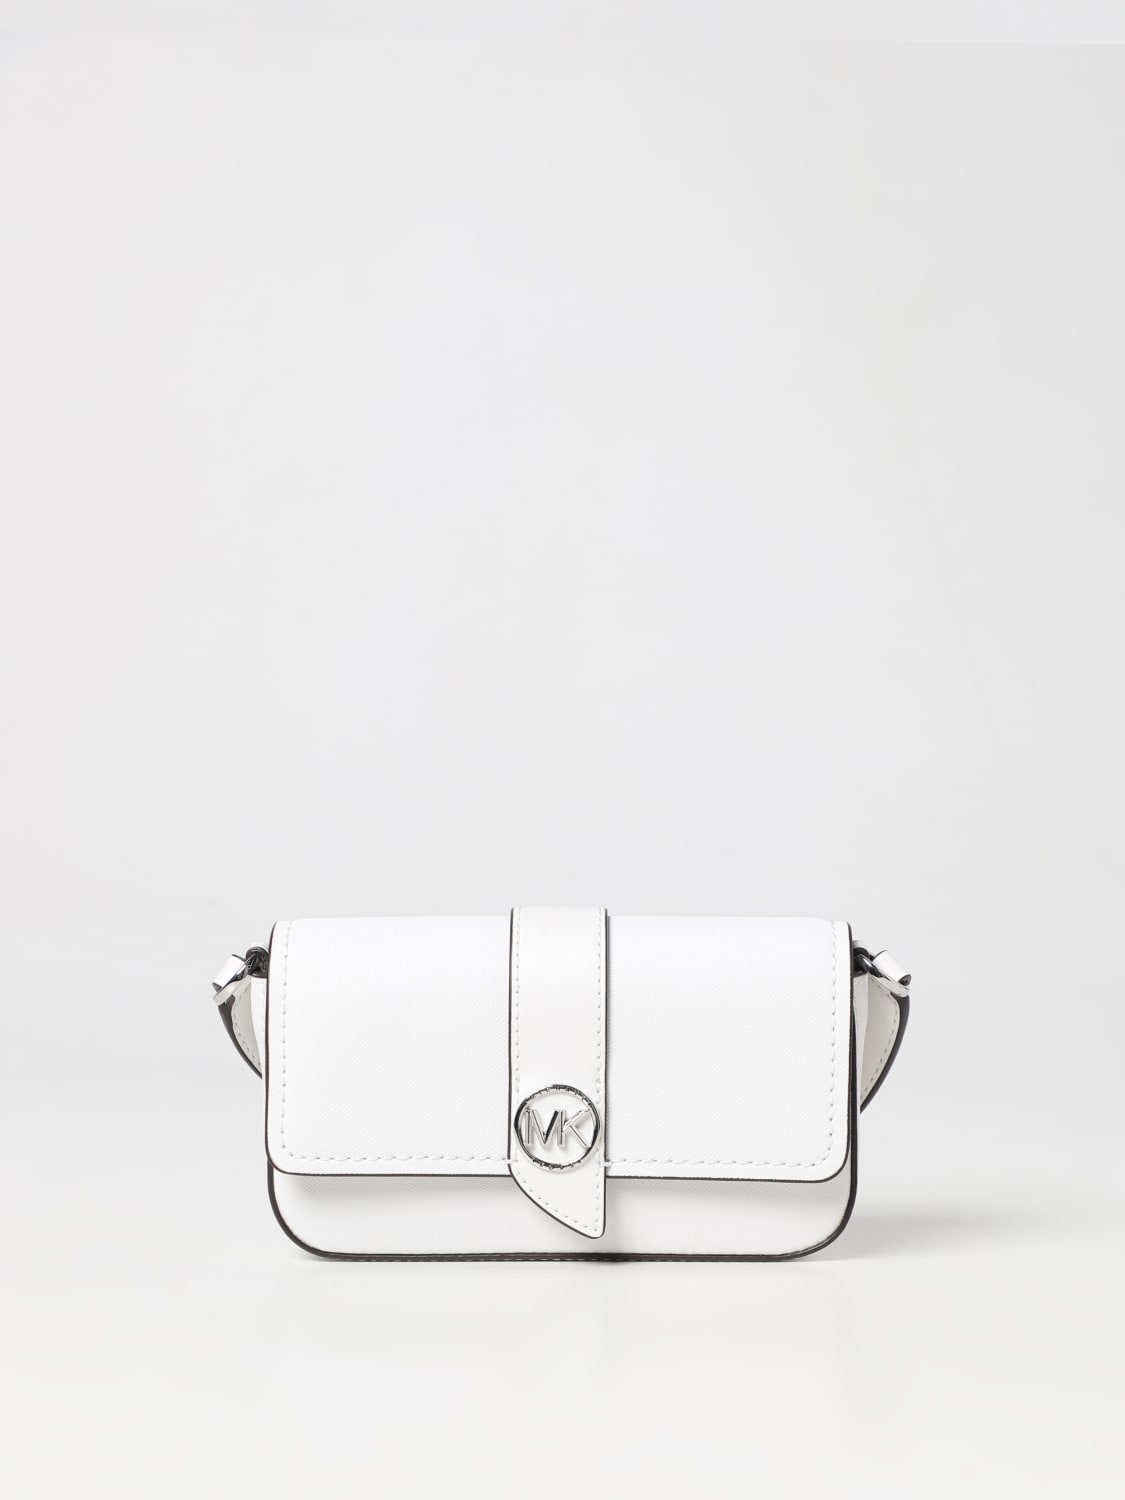 Michael Kors Outlet: Michael Greenwich bag in leather - Leather